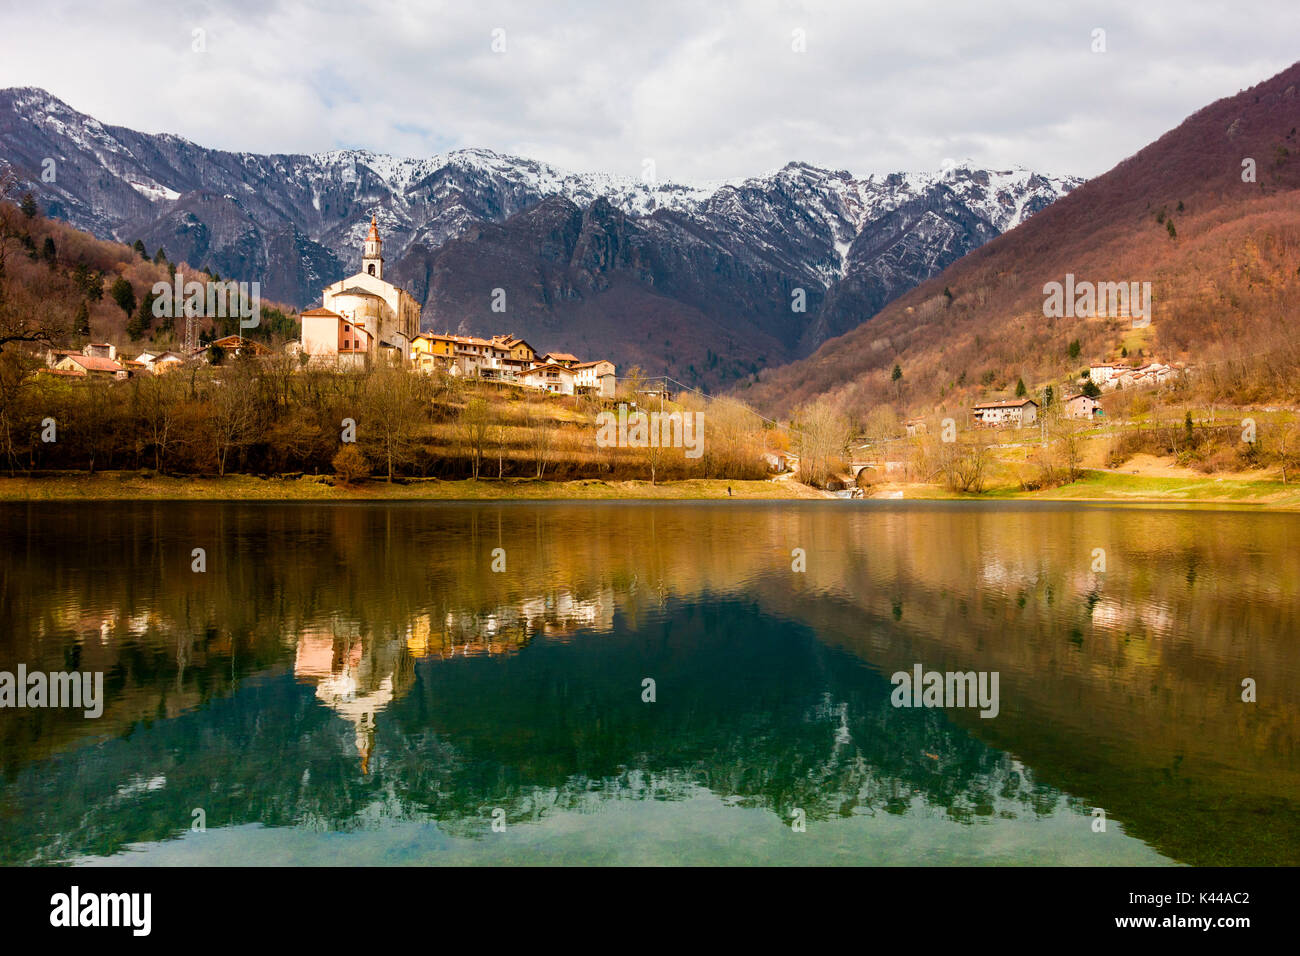 Laghi, Province of Vicenza, Veneto, Italy. Reflections of a church in a lake. Stock Photo